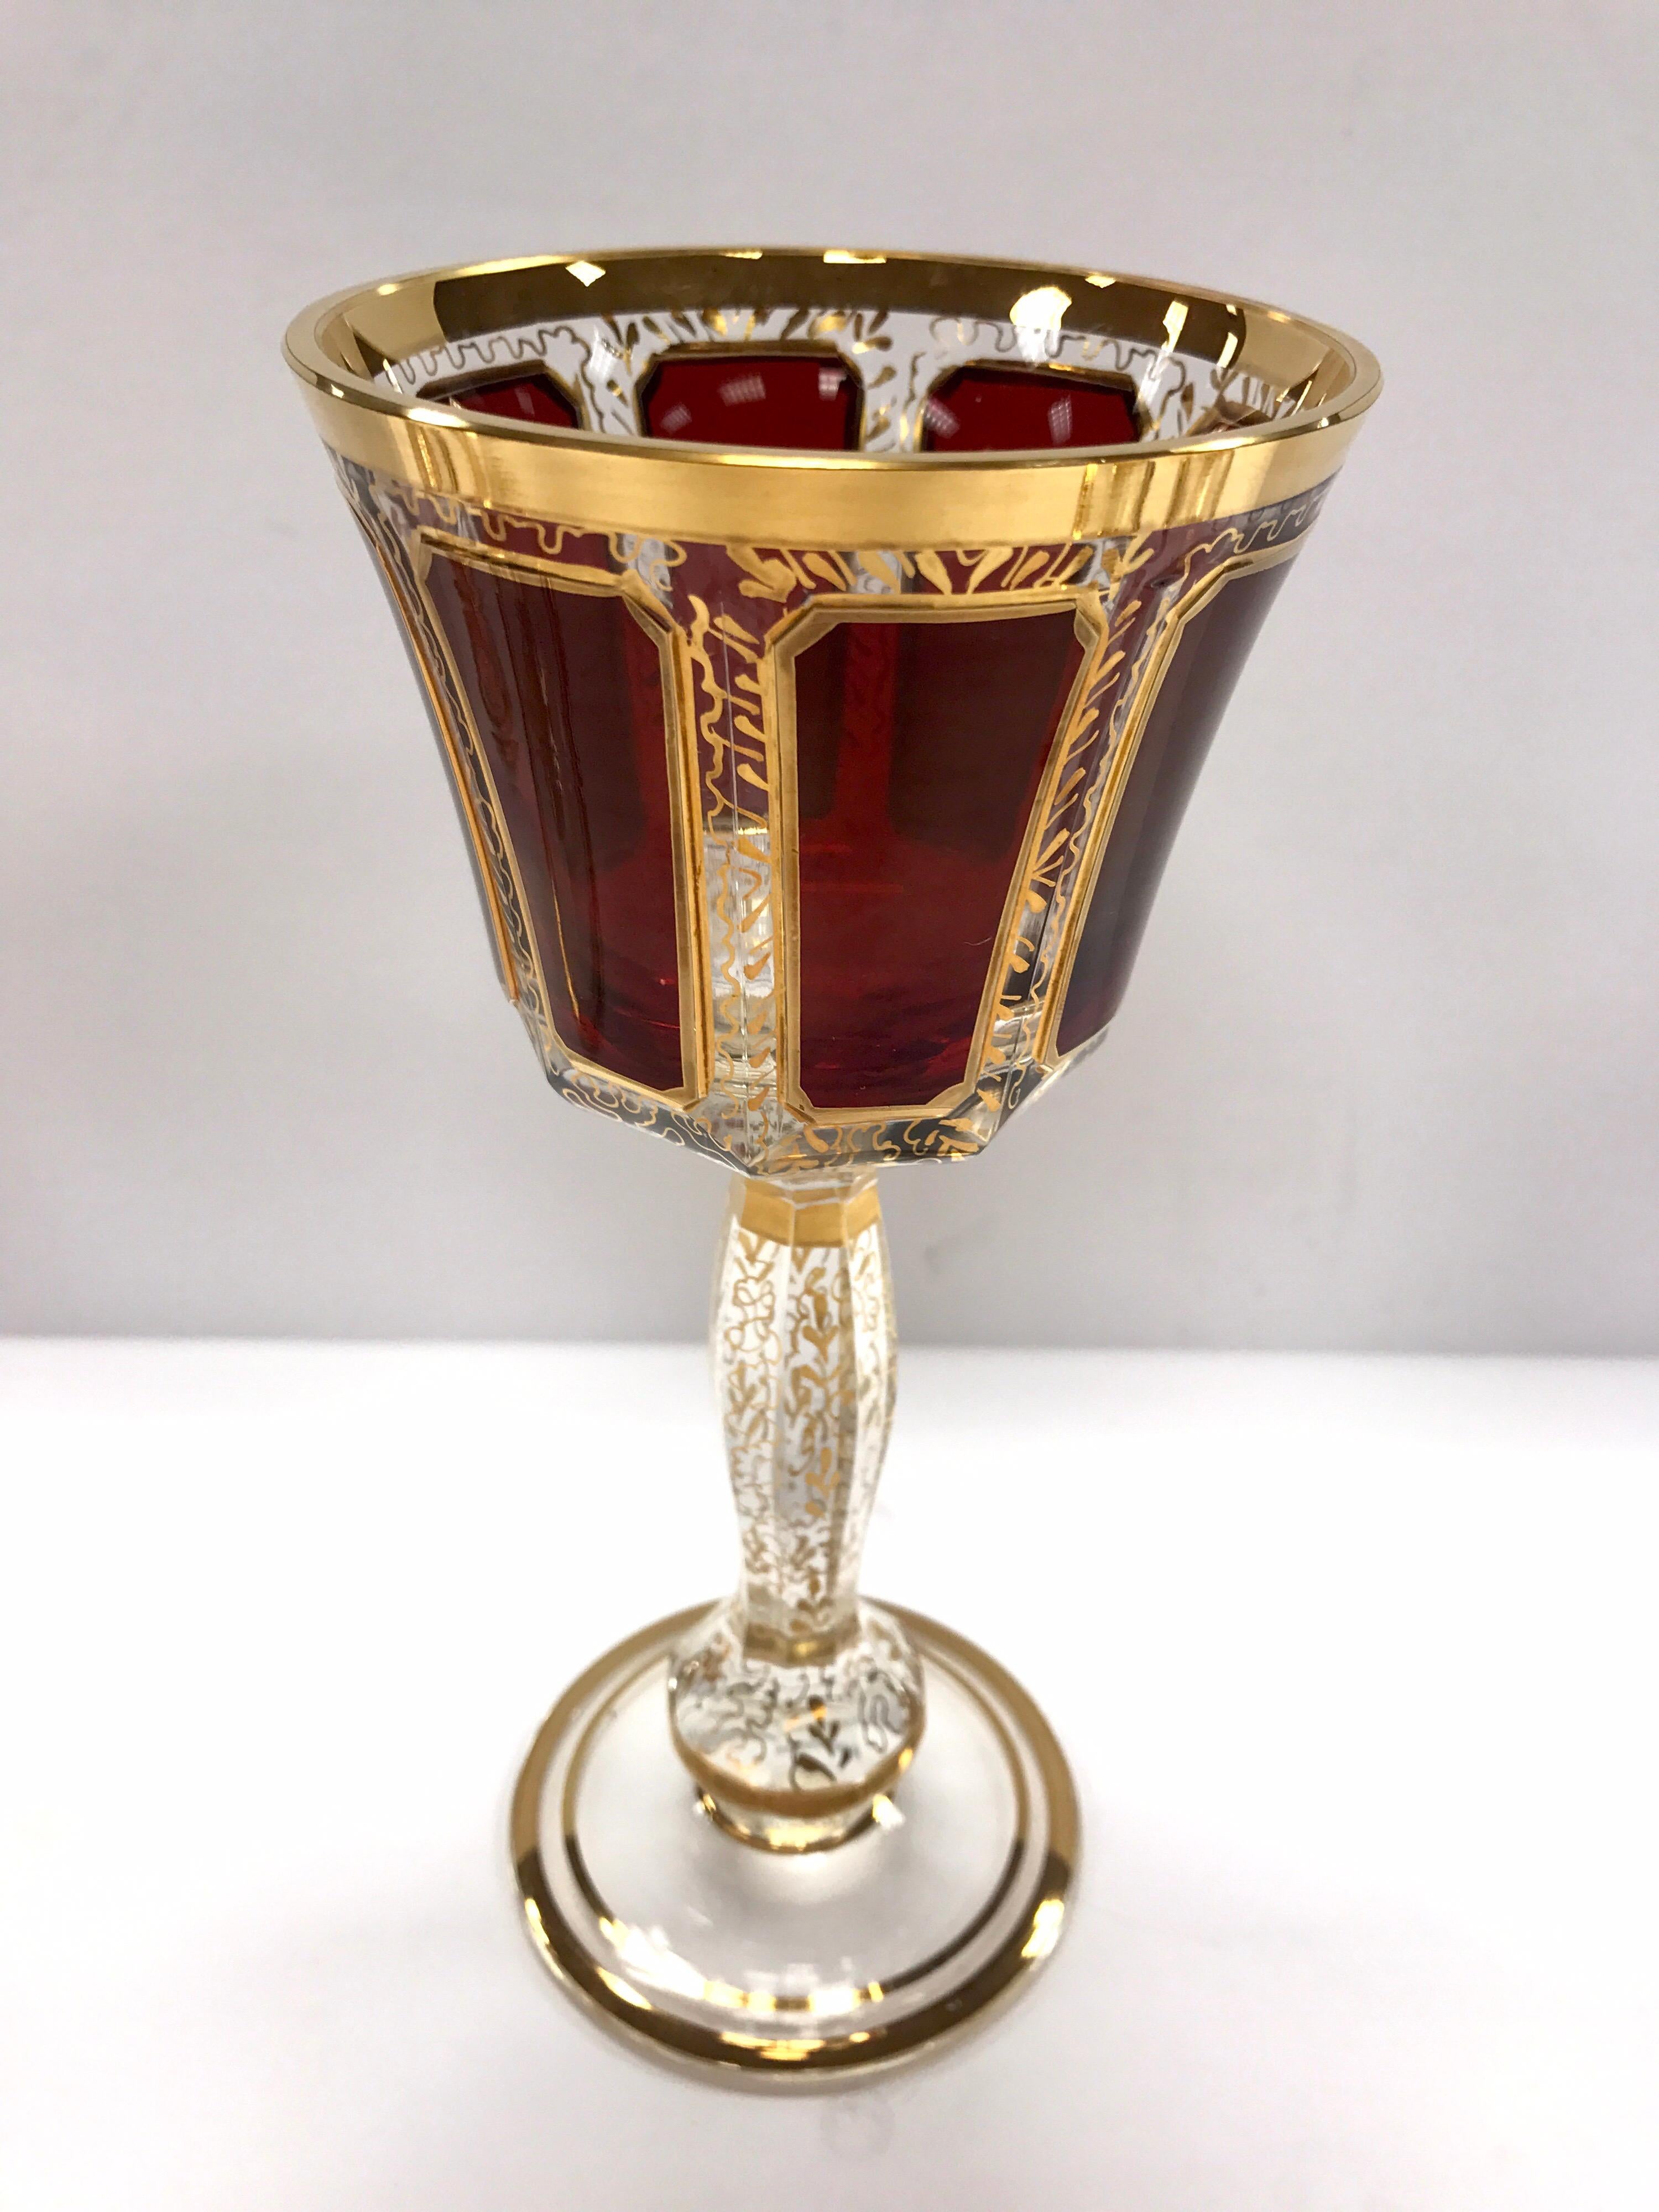 Rare set of Moser wine glasses done in burgundy red and gold.